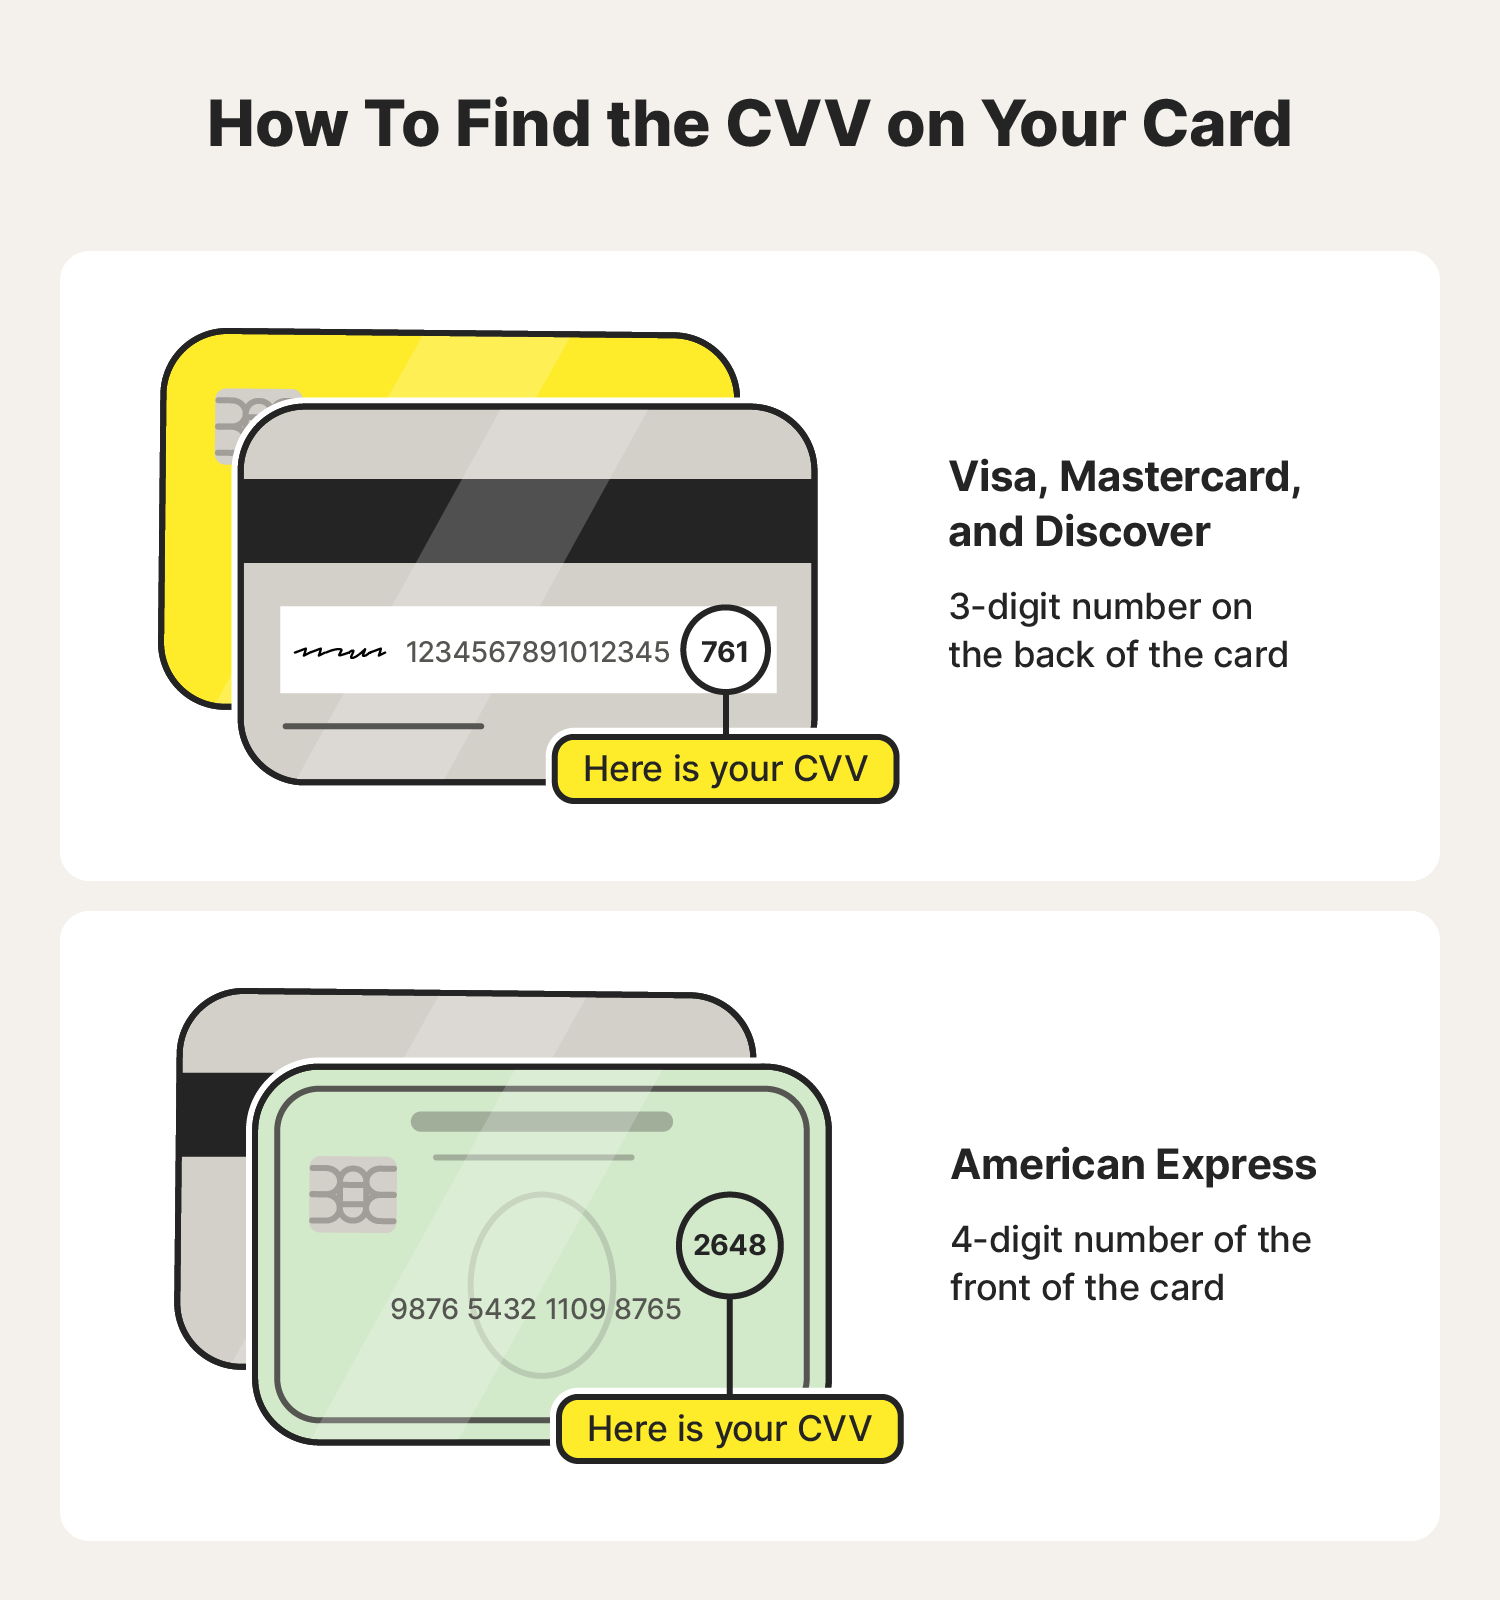 An illustration of a Visa, Mastercard, Discover, and Amex credit card portray where to find a CVV on each.